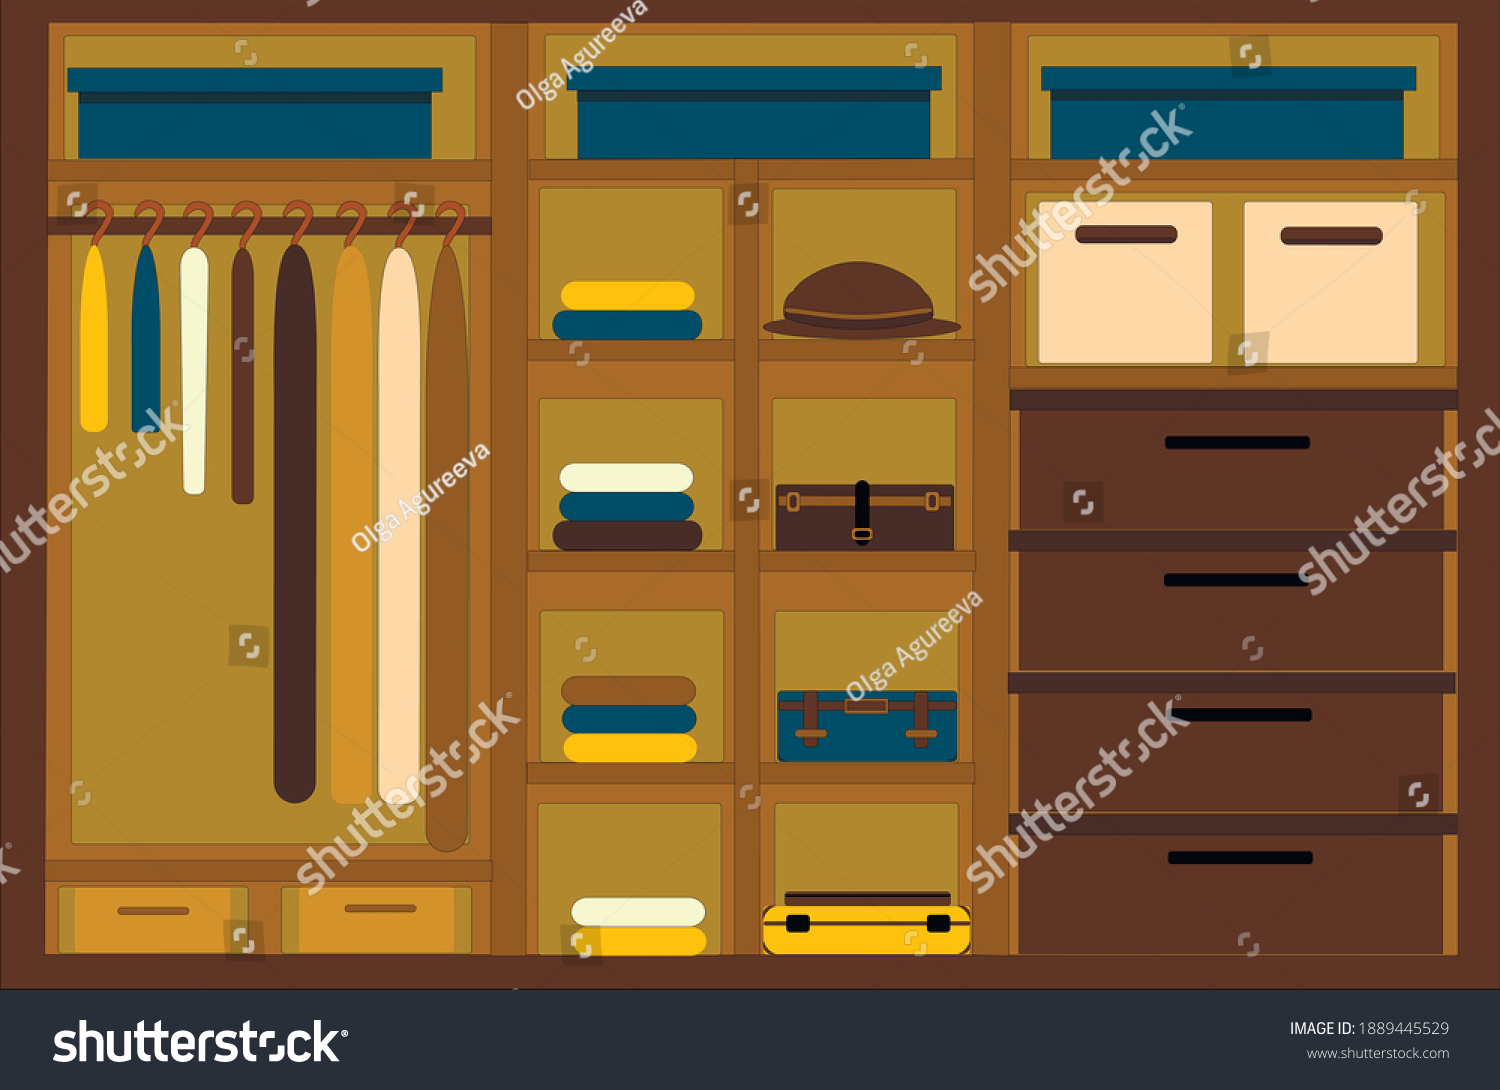 7,588 Organizing things Images, Stock Photos & Vectors | Shutterstock